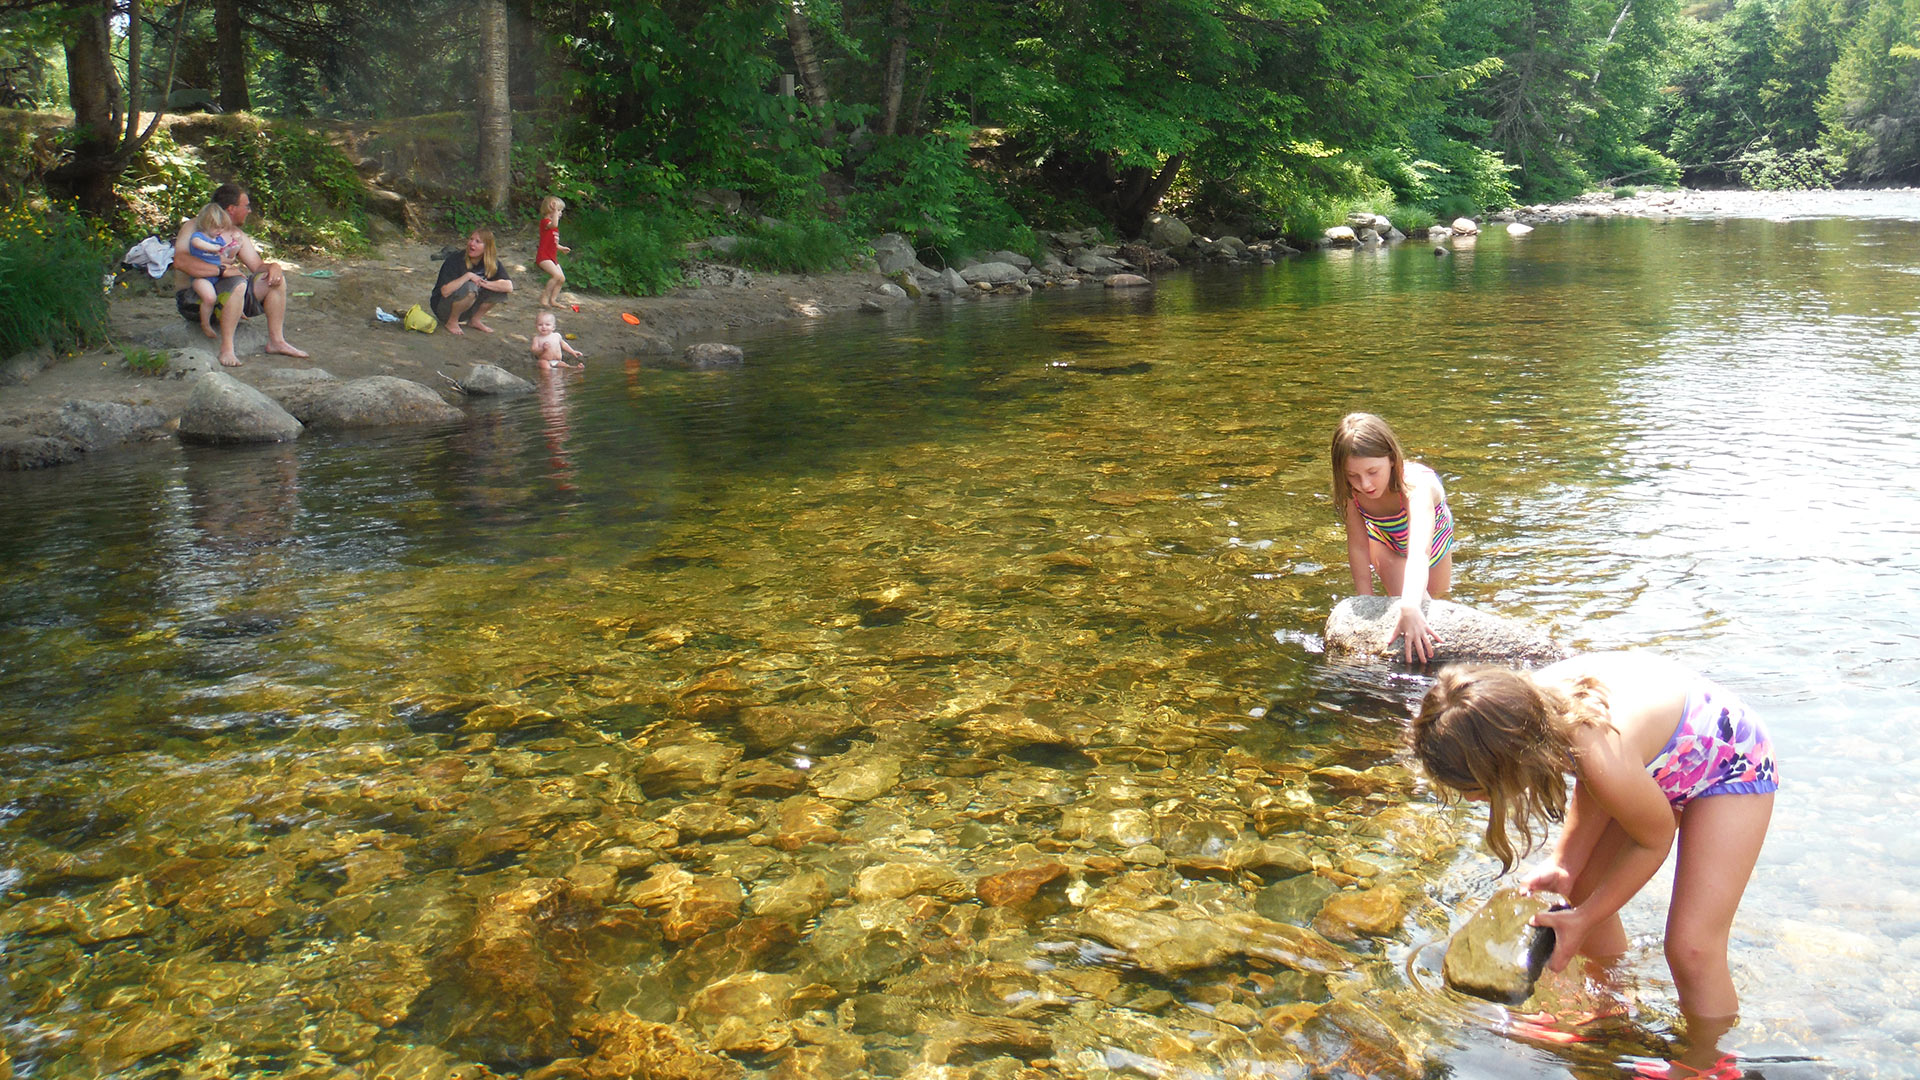 Exploring the brook at Scenic View Campground